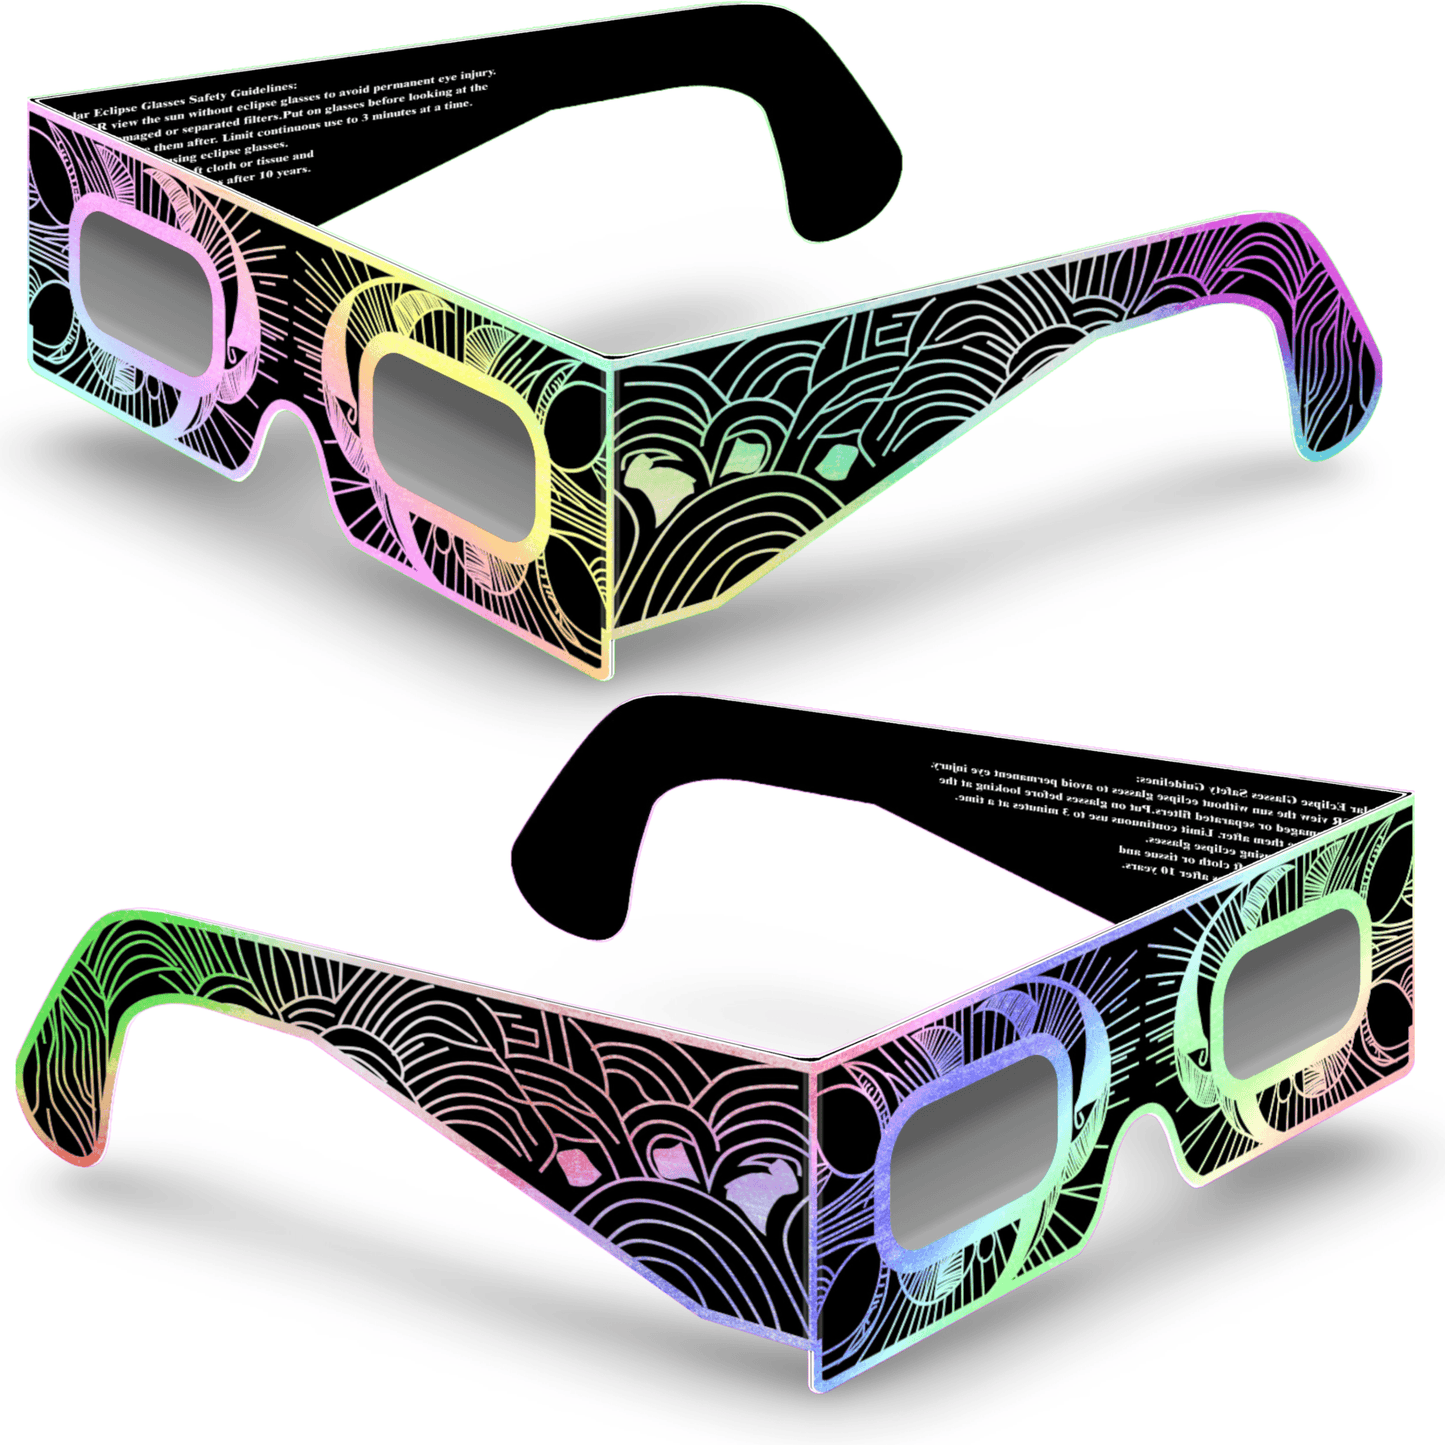 Solar Eclipse Glasses - Reflective - Absolute Eclipse